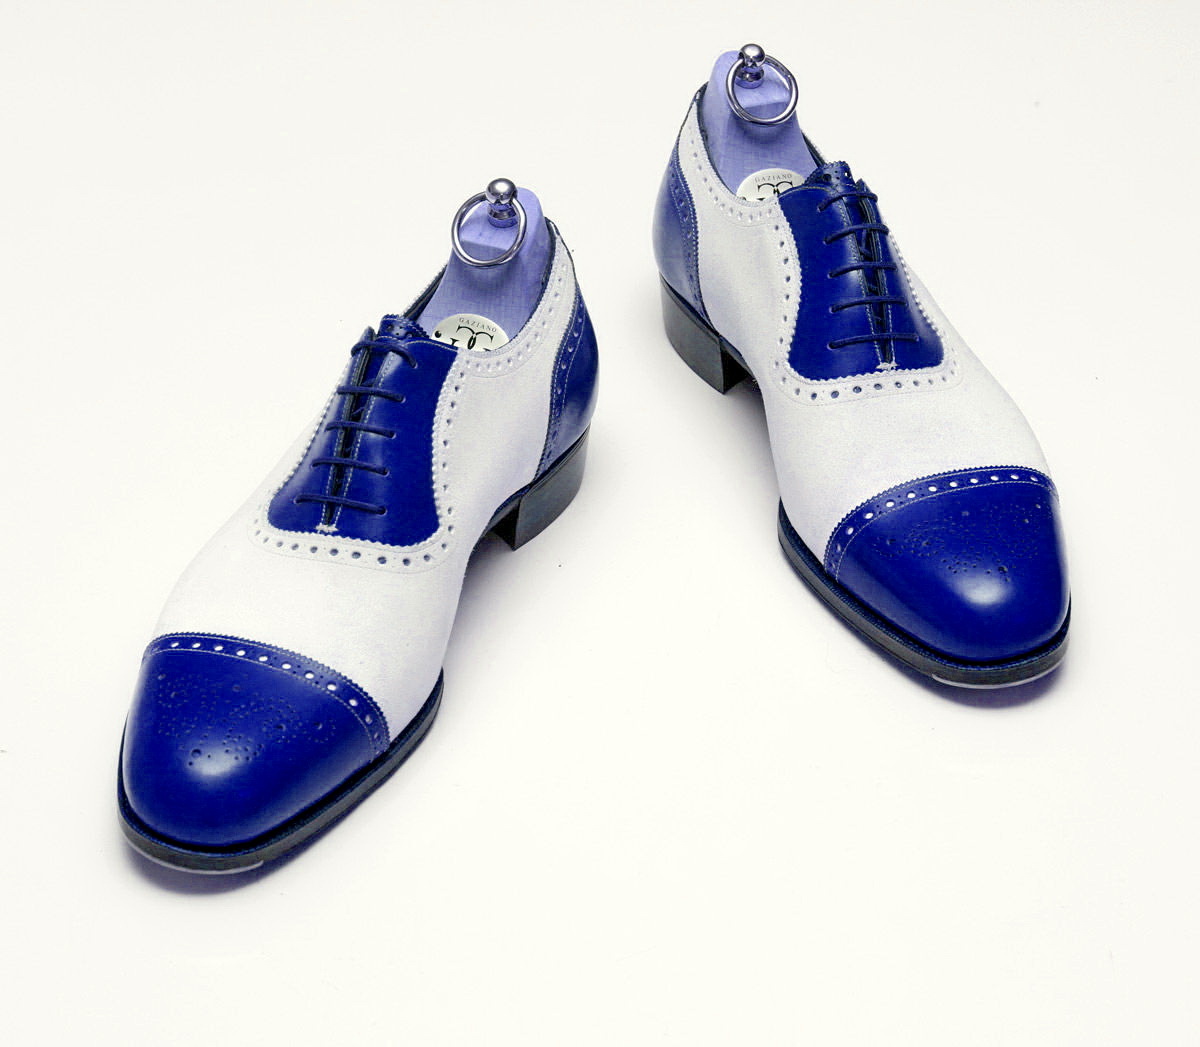 Two Tone White Blue Contrast Oxford Brogue Toe Black Sole Leather Lace up Shoes